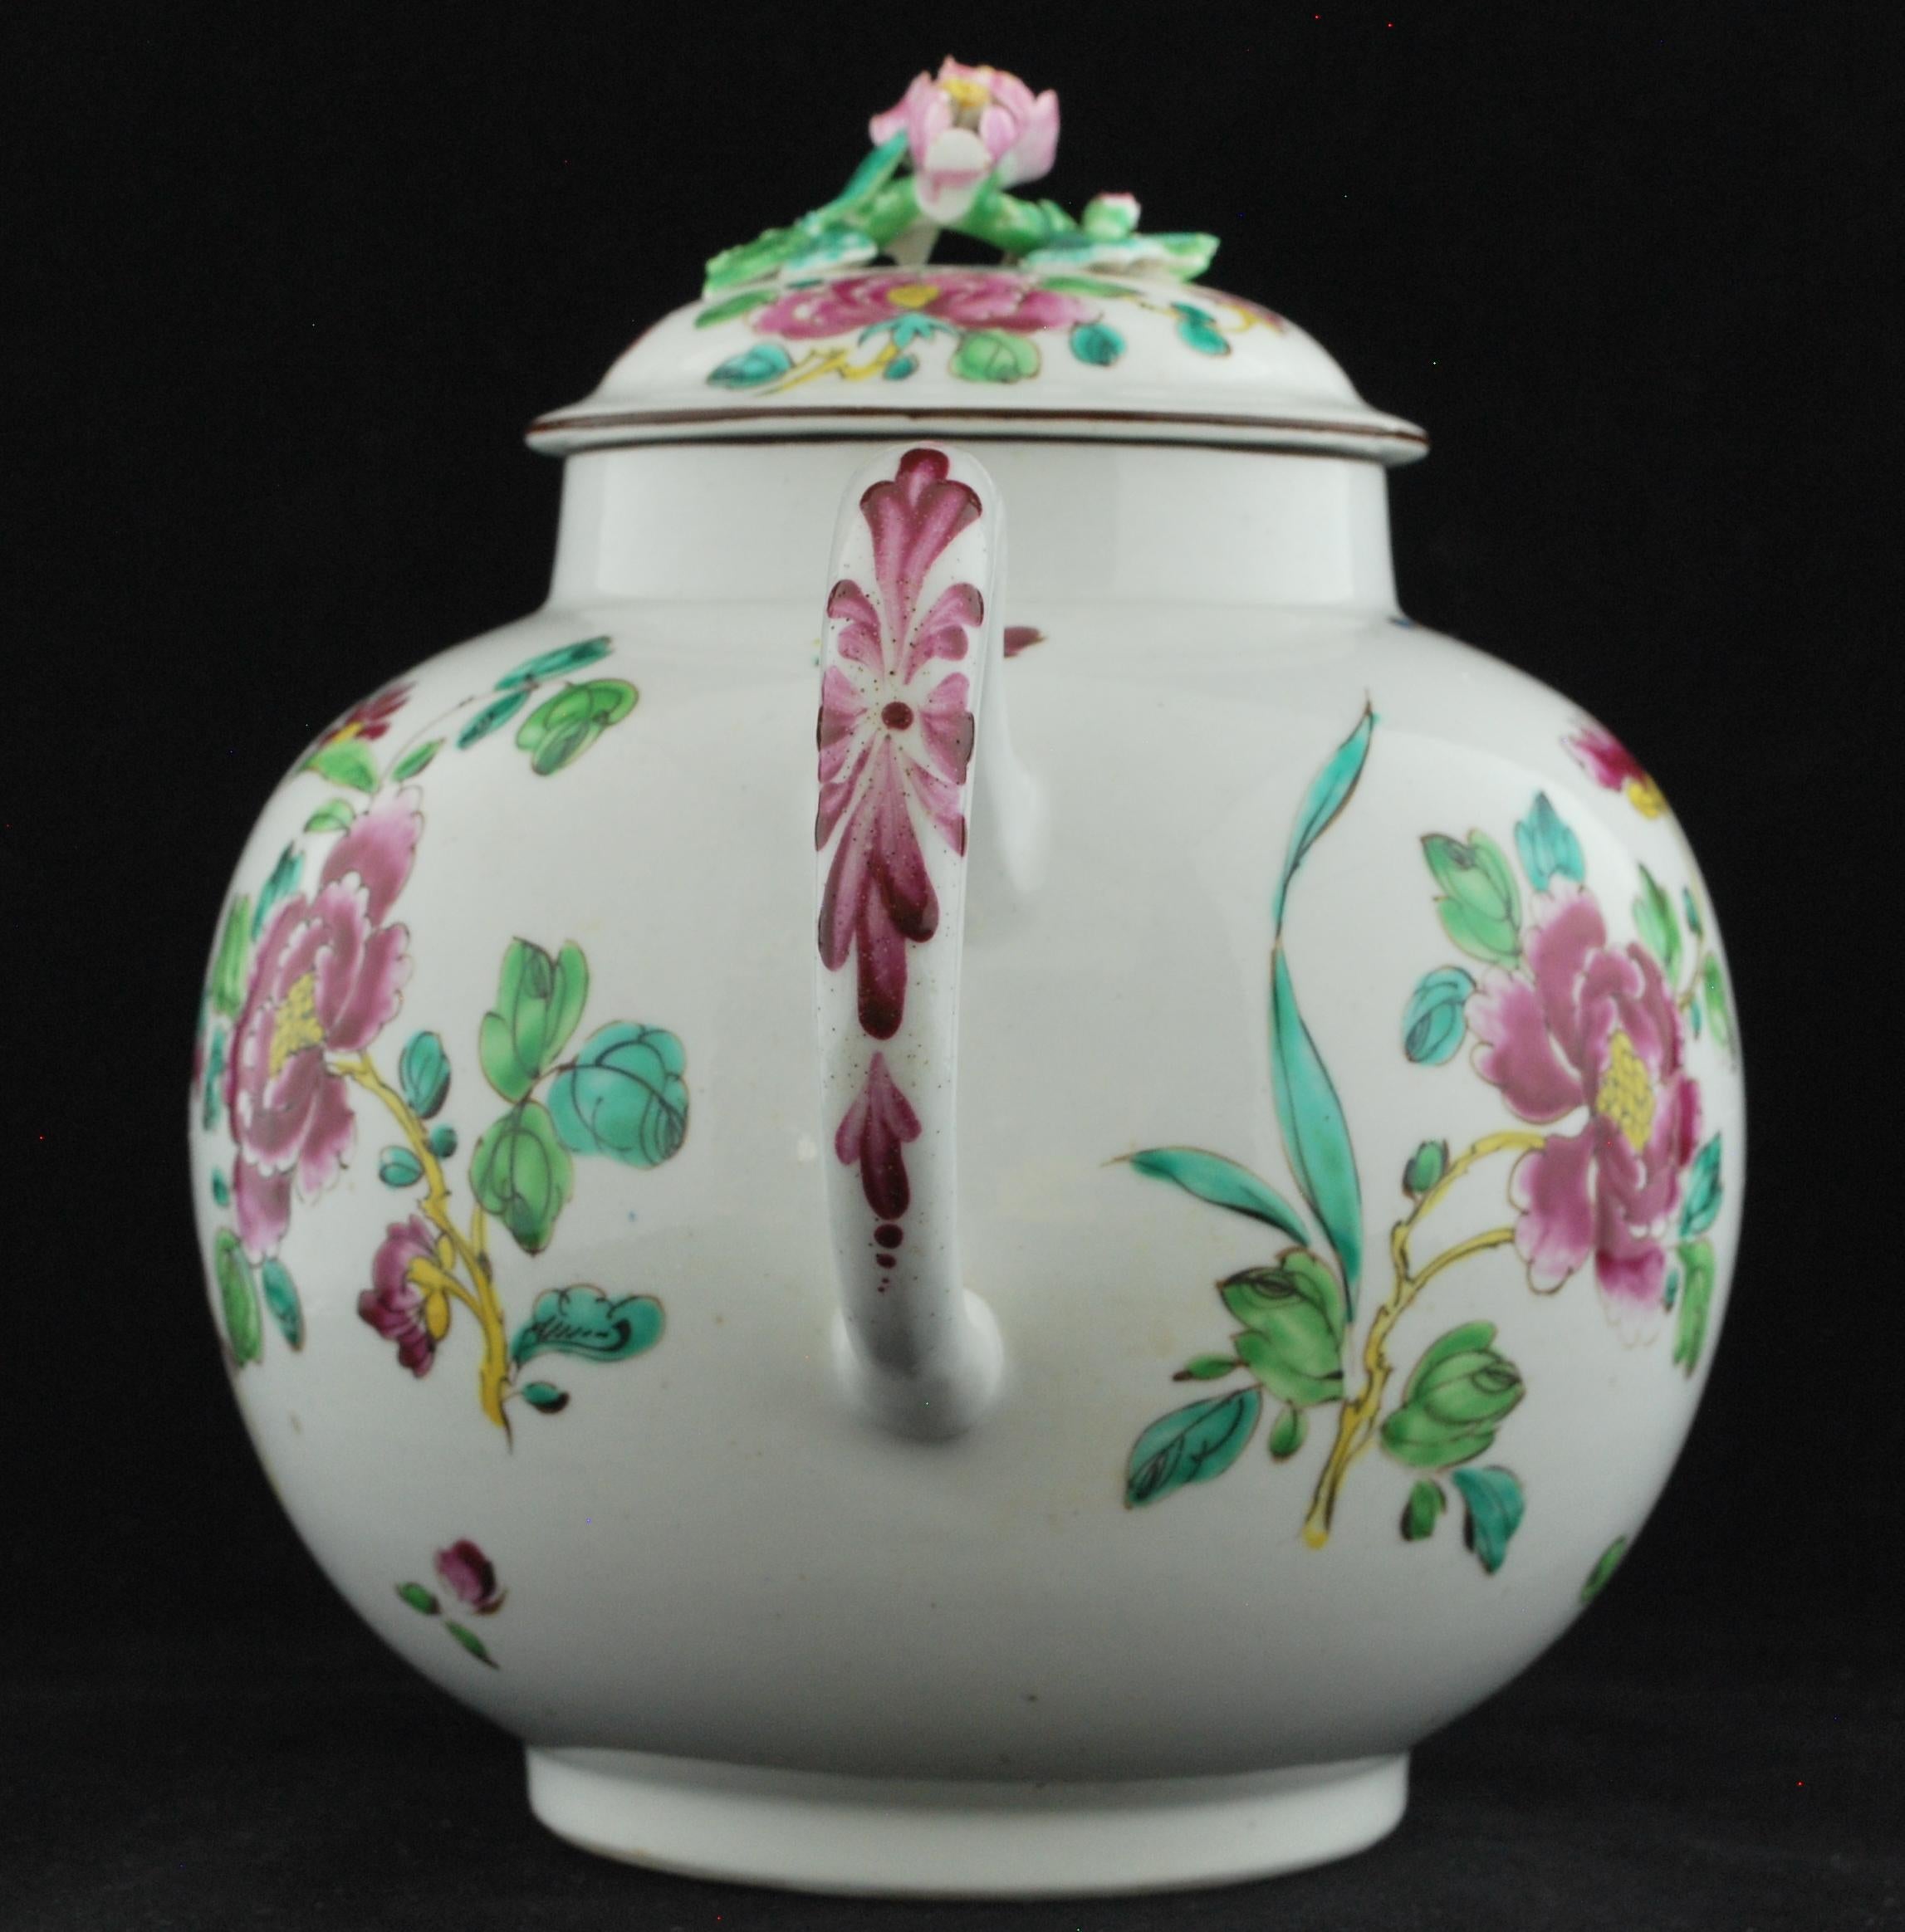 A large tea-pot, or perhaps a punch pot, of globular form with loop handle. Painted in a vibrant wet palette after the Chinese. A most attractive example, of unusual size. The pot has close links to (i) the ‘Frederick the Great’ example, circa